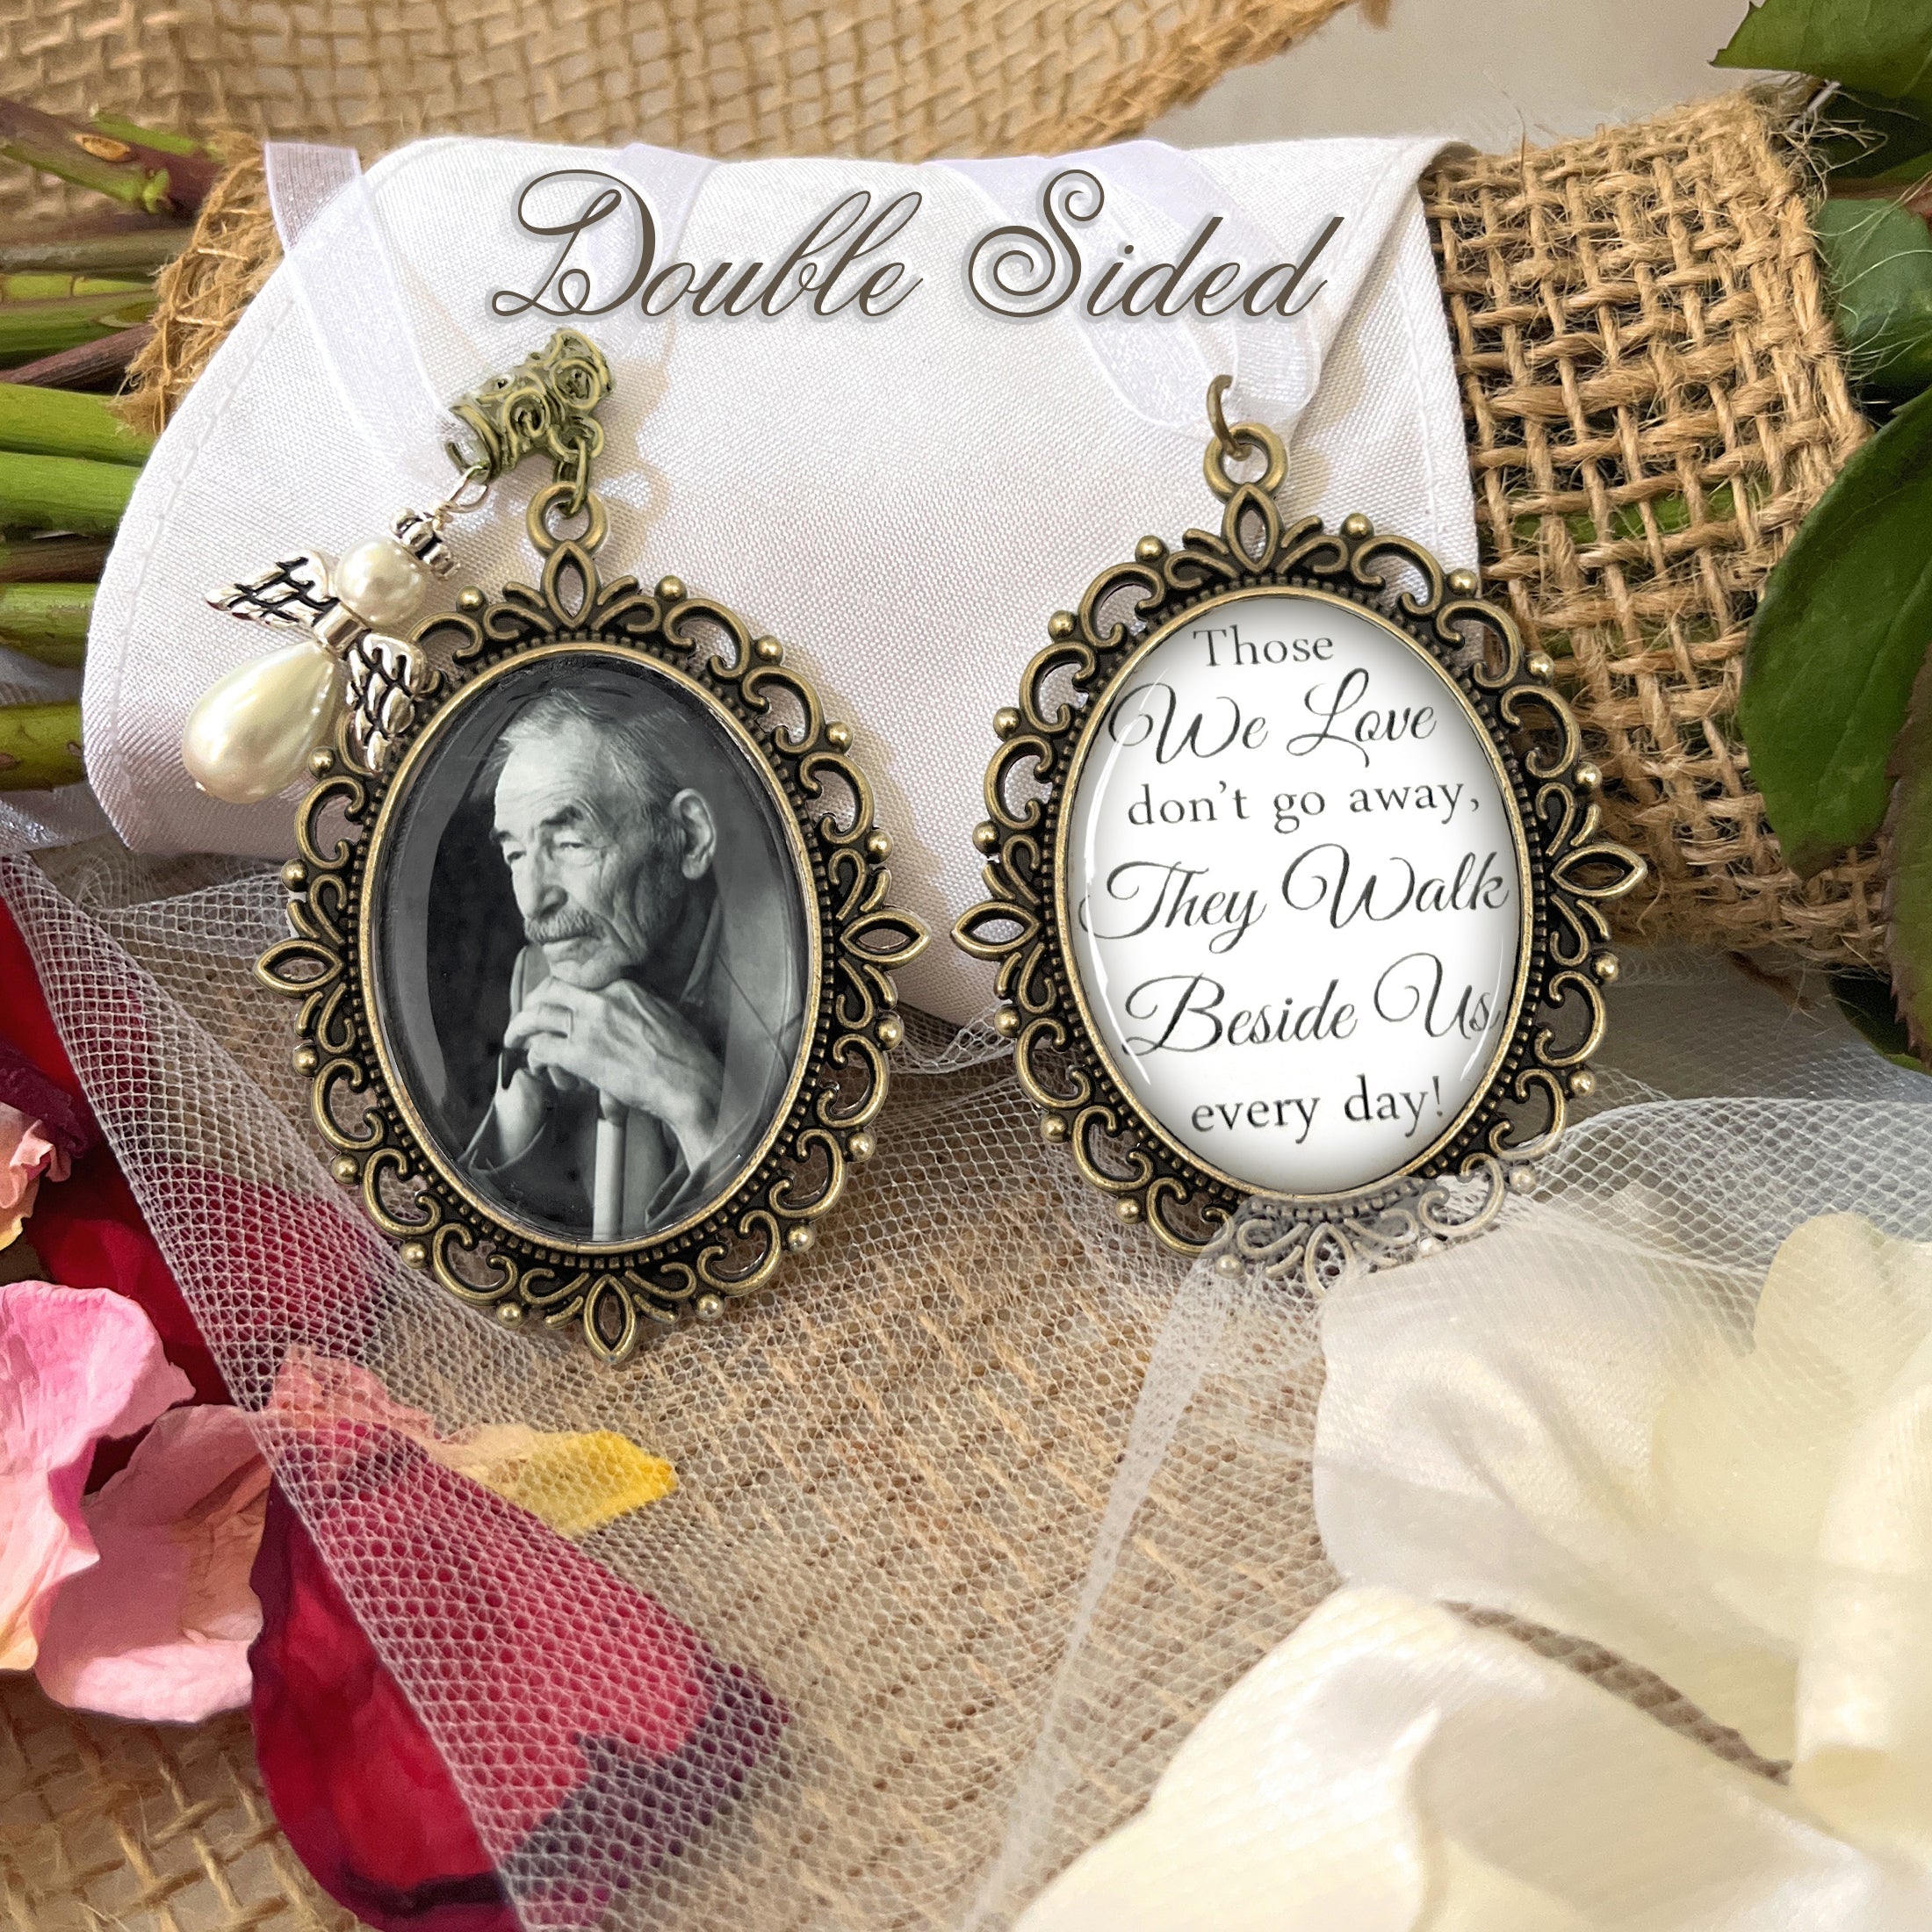 Bouquet Charm on Your Wedding Day Mom Dad Memorial Bridal Memorial Custom Photo Frame My Daughter